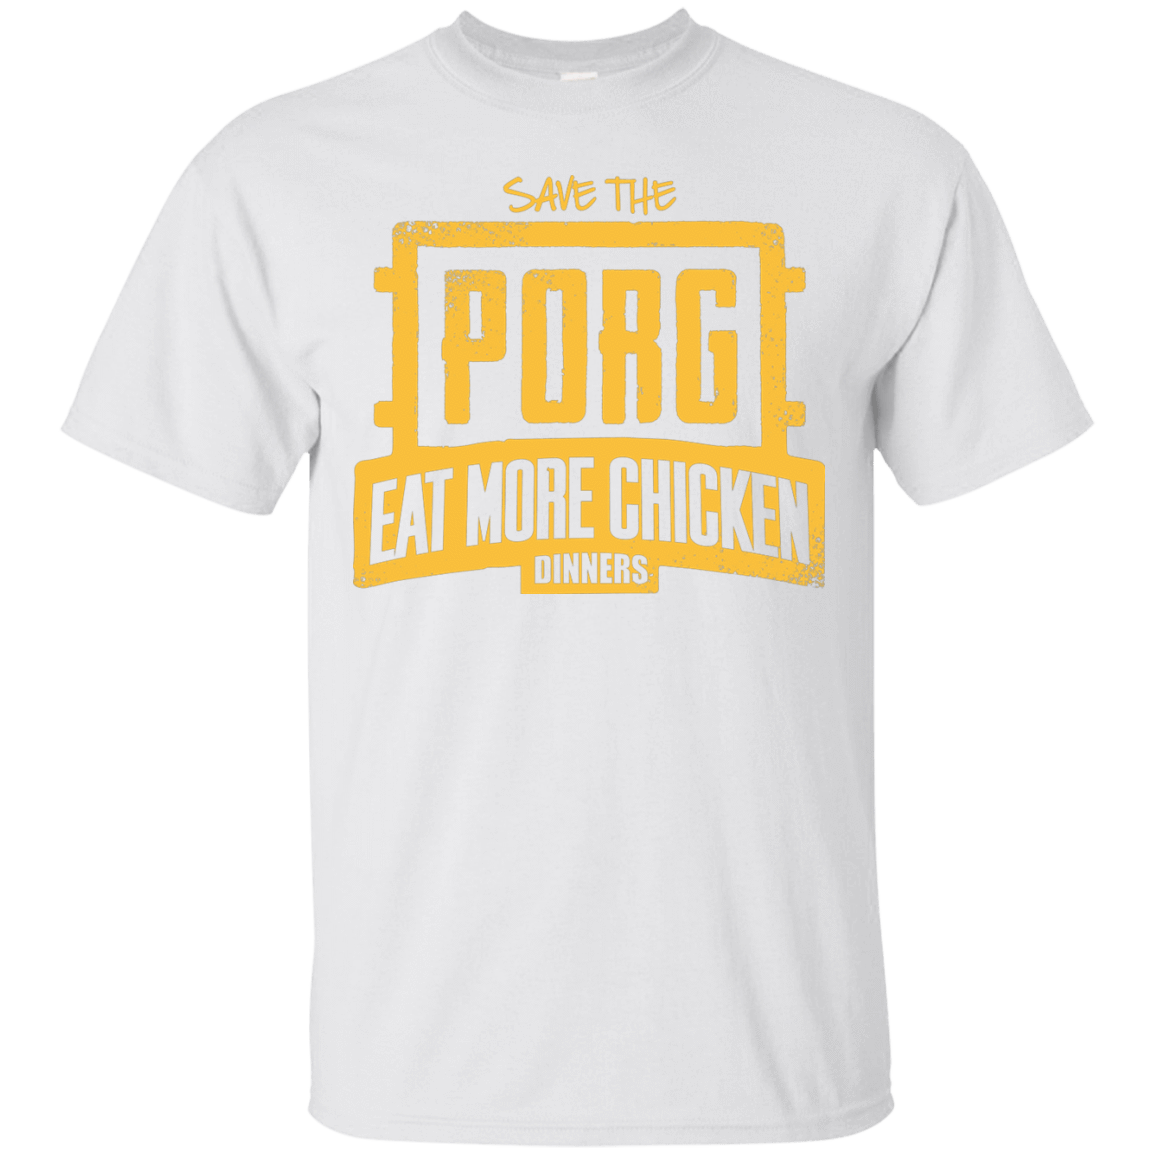 T-Shirts White / Small Eat More Chicken T-Shirt